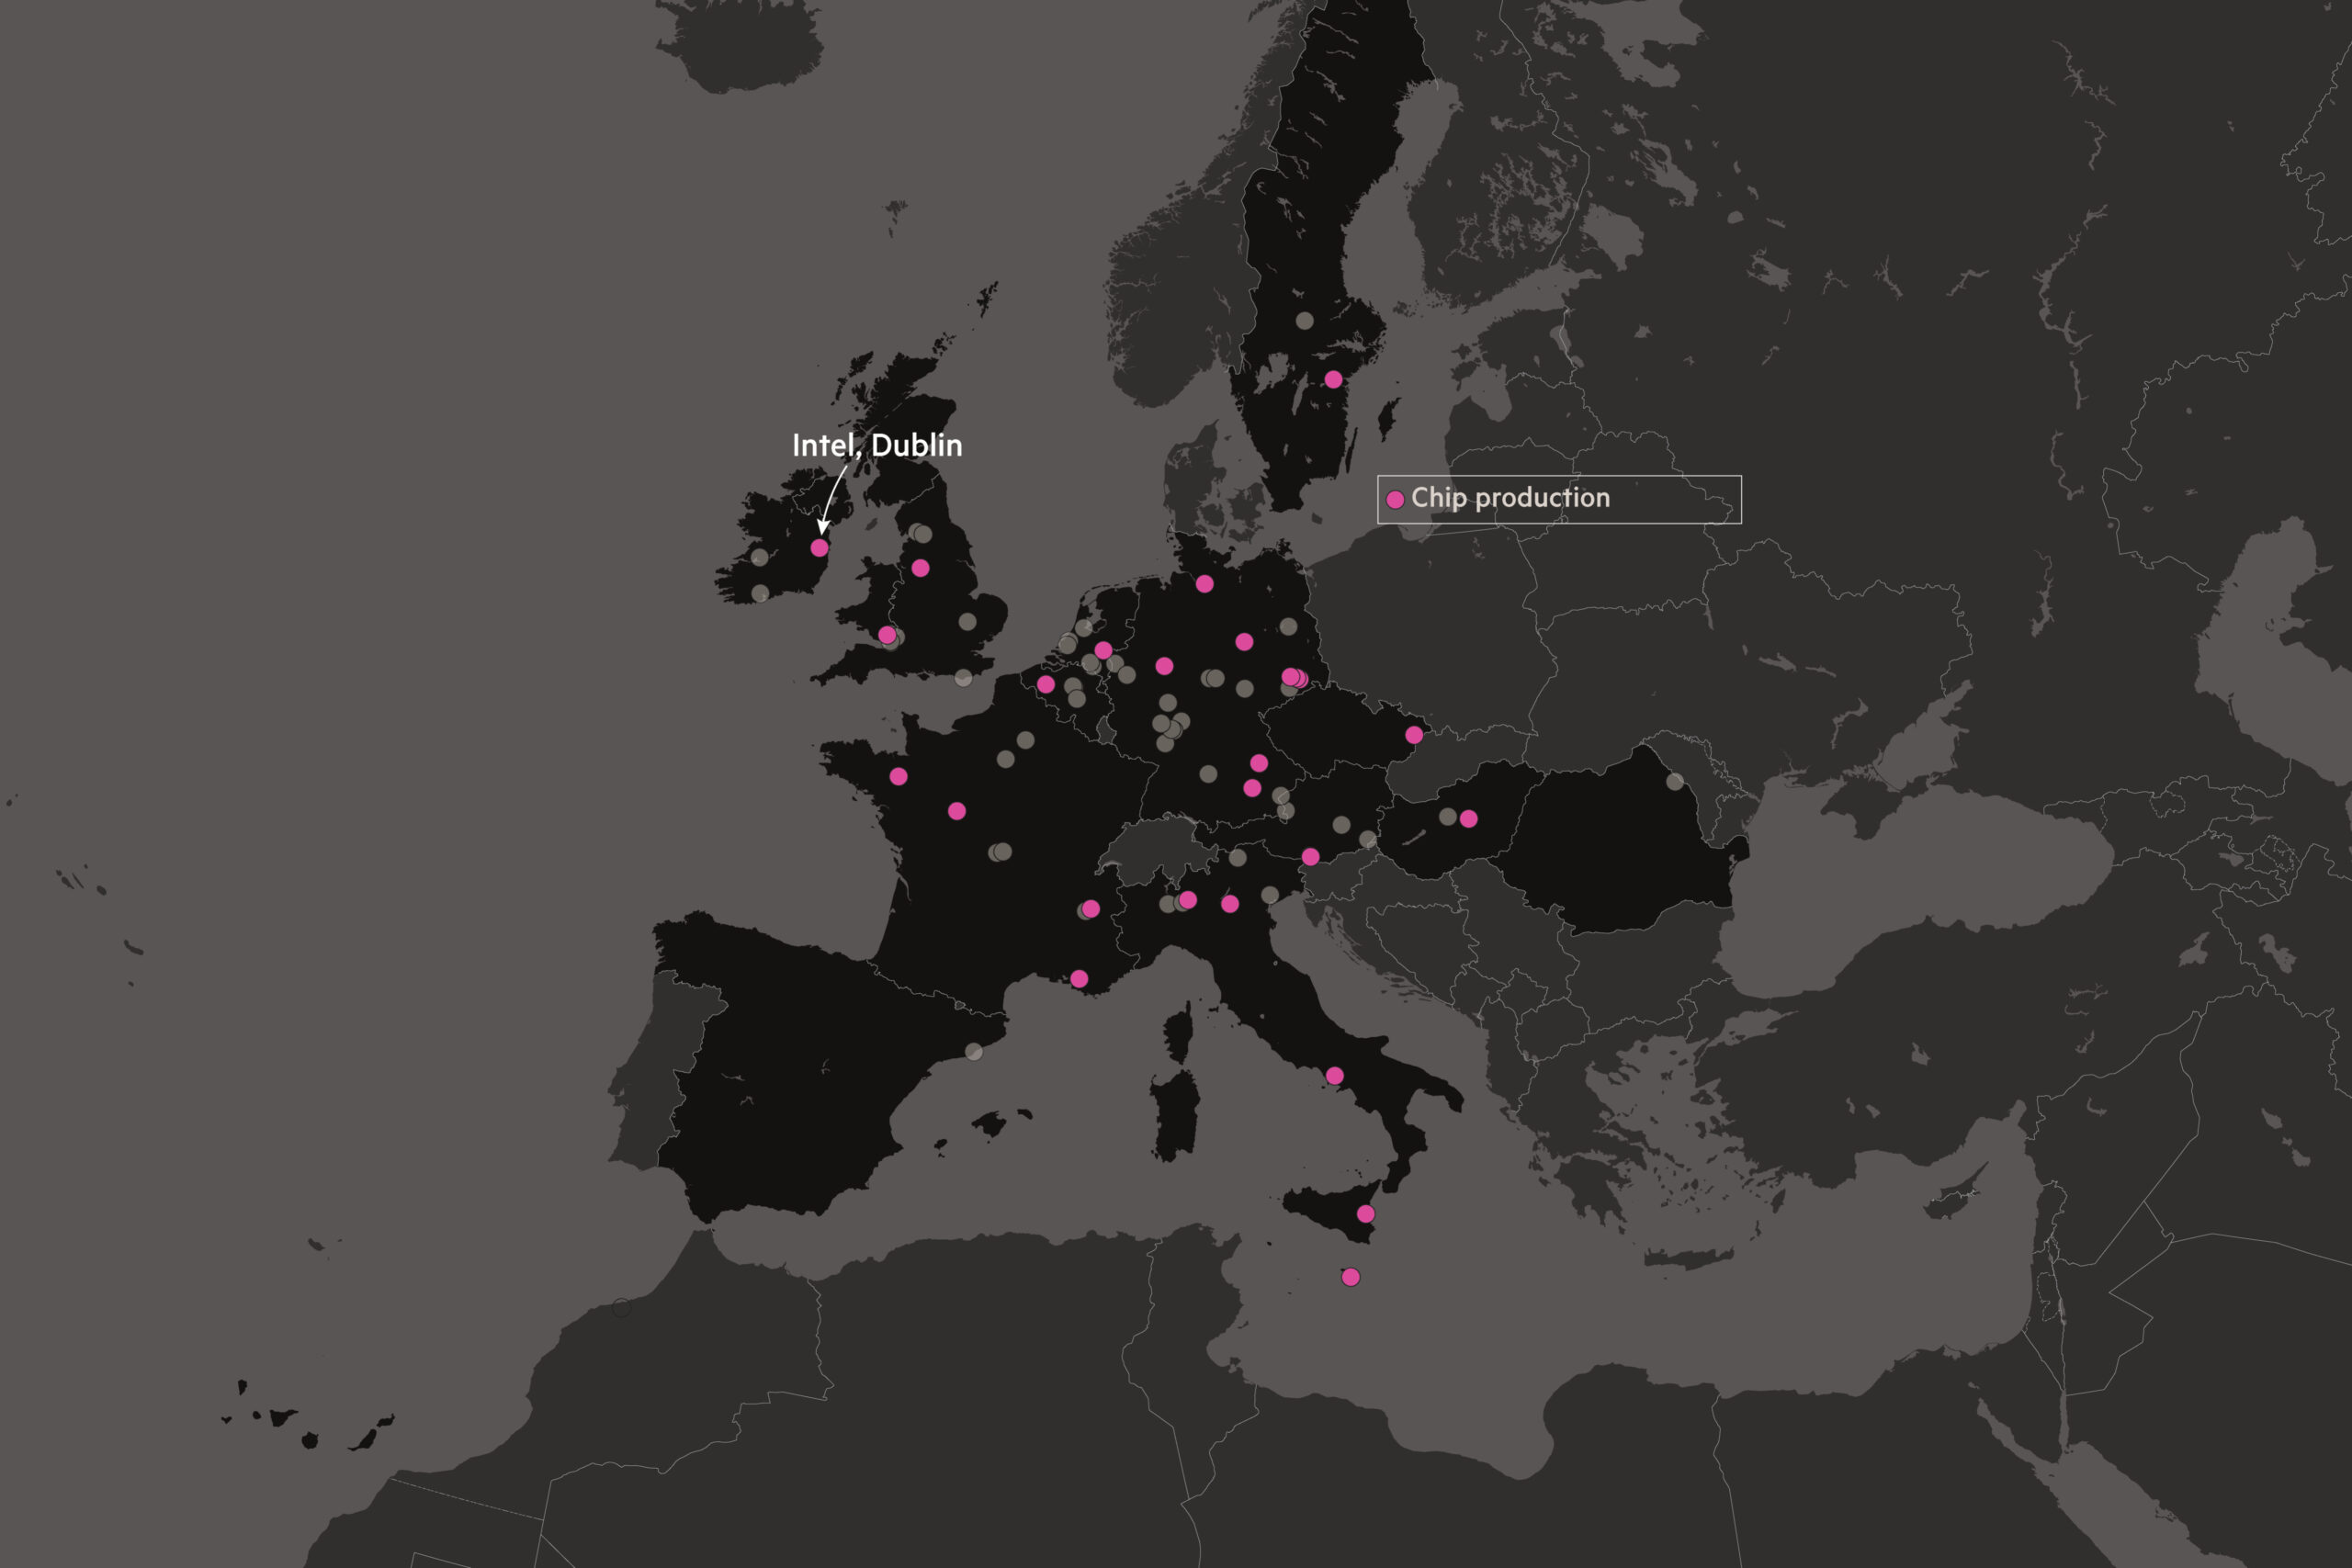 A map showing the location of chip production locations in Europe. Intel in Dublin is highlighted as it is the only facility which will be capable of sub 10nm production